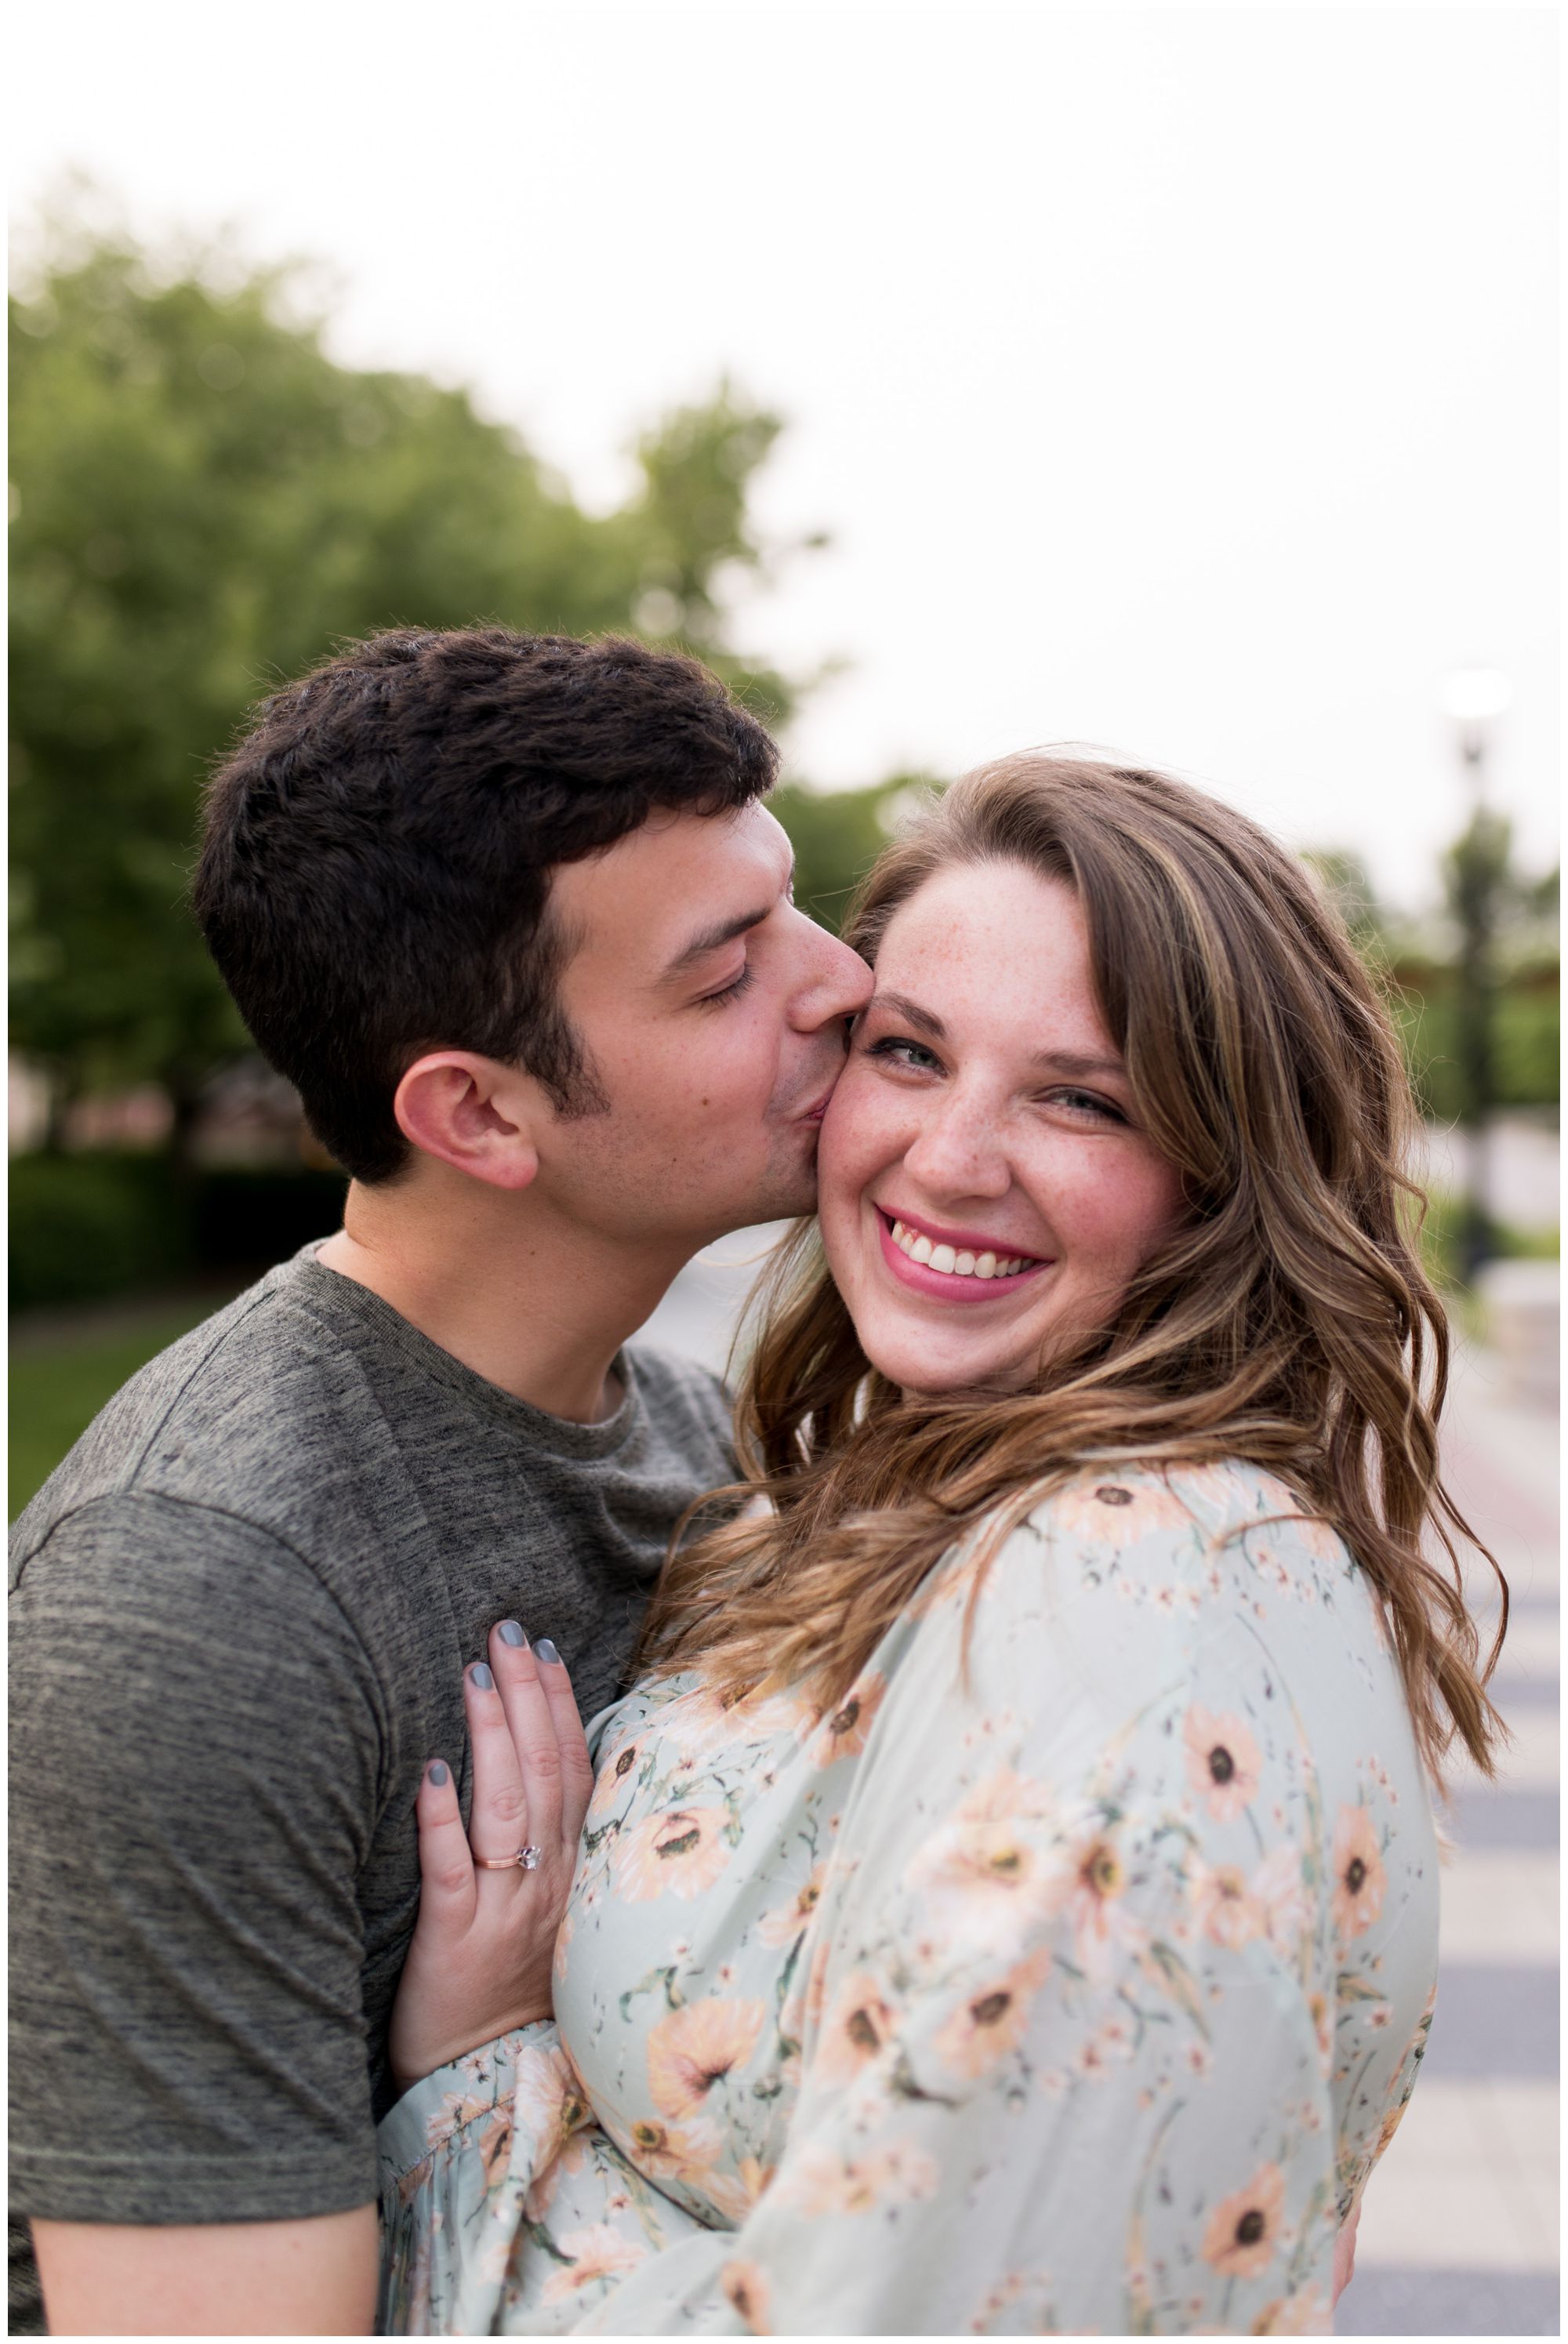 groom kisses bride on cheek during Purdue University engagement session in West Lafayette Indiana